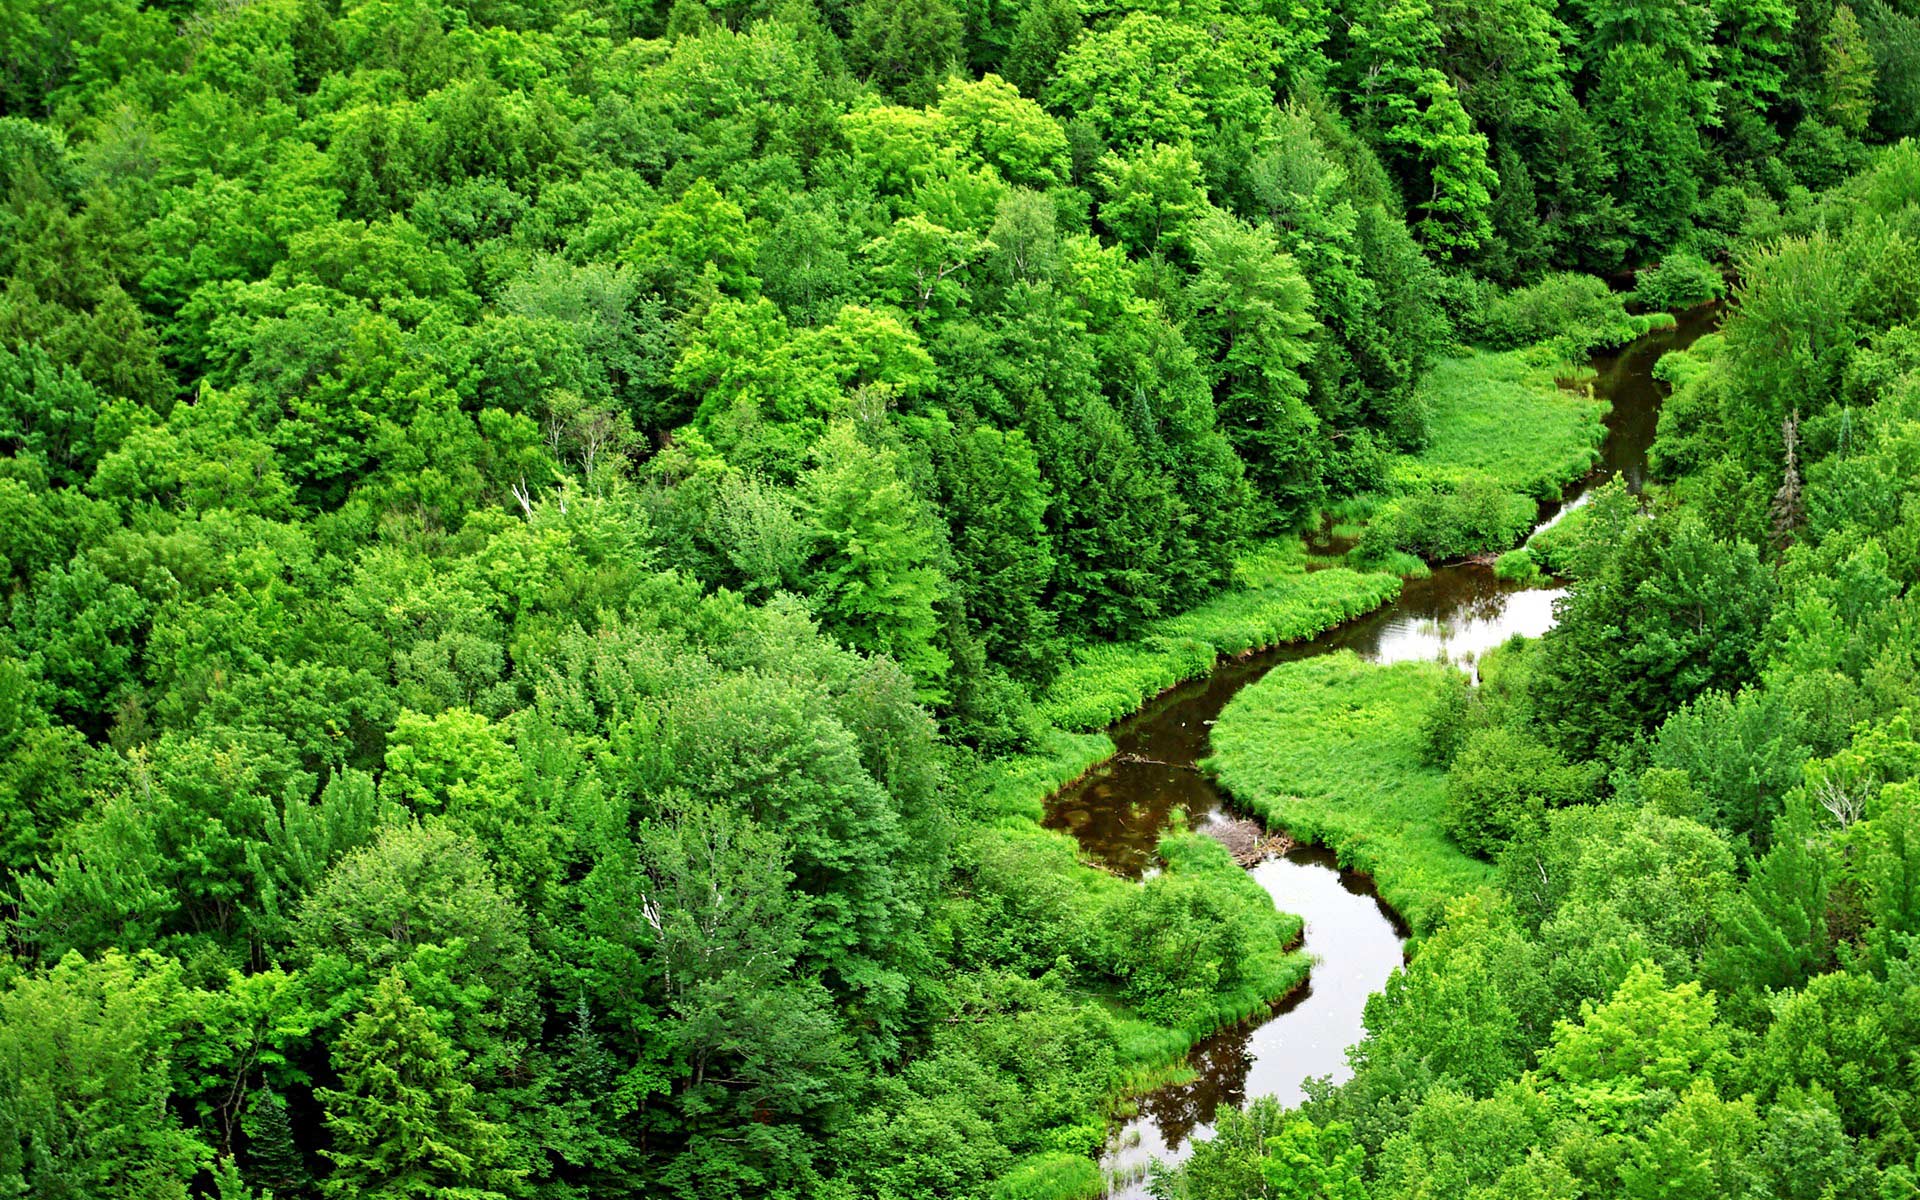 Scenery Wallpaper Gallery Paper Stream Forest About Services